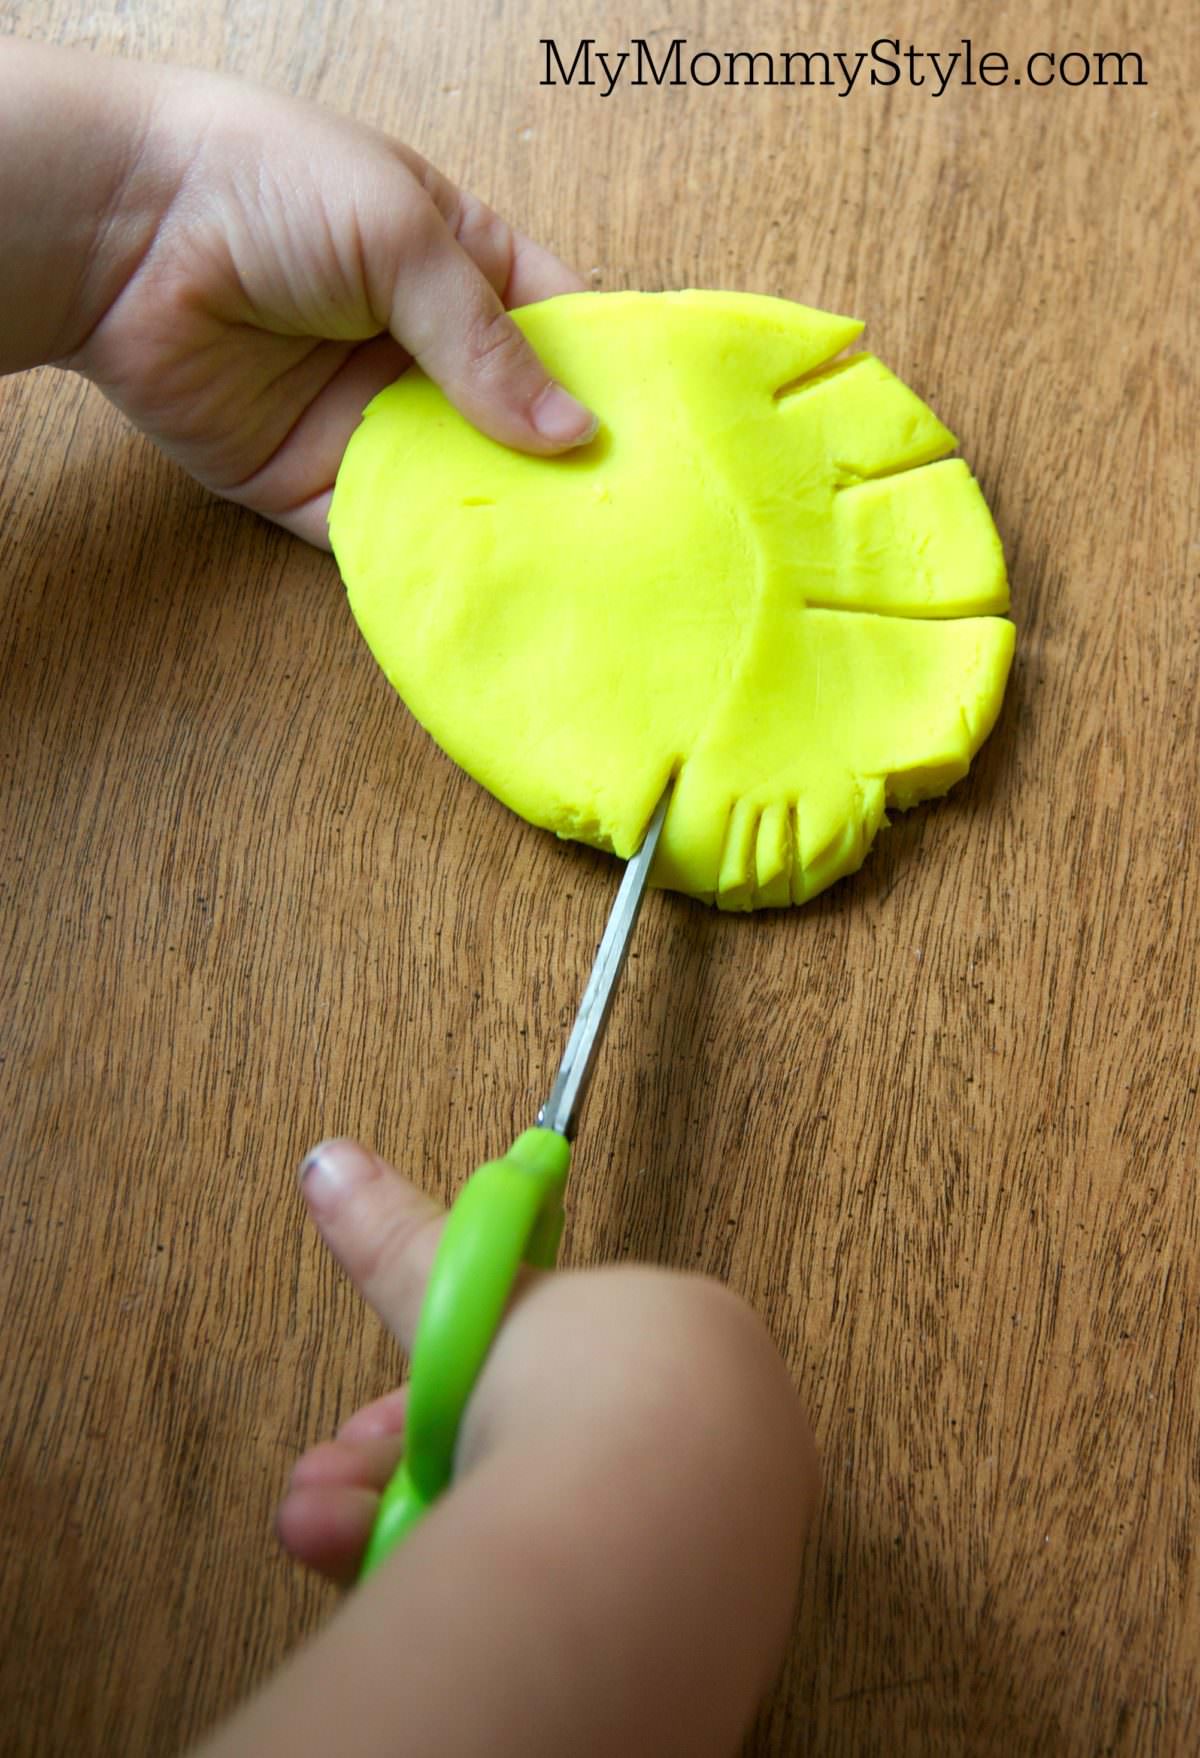 https://www.mymommystyle.com/wp-content/uploads/2015/07/02-12373-post/play-dough-scissors.jpg